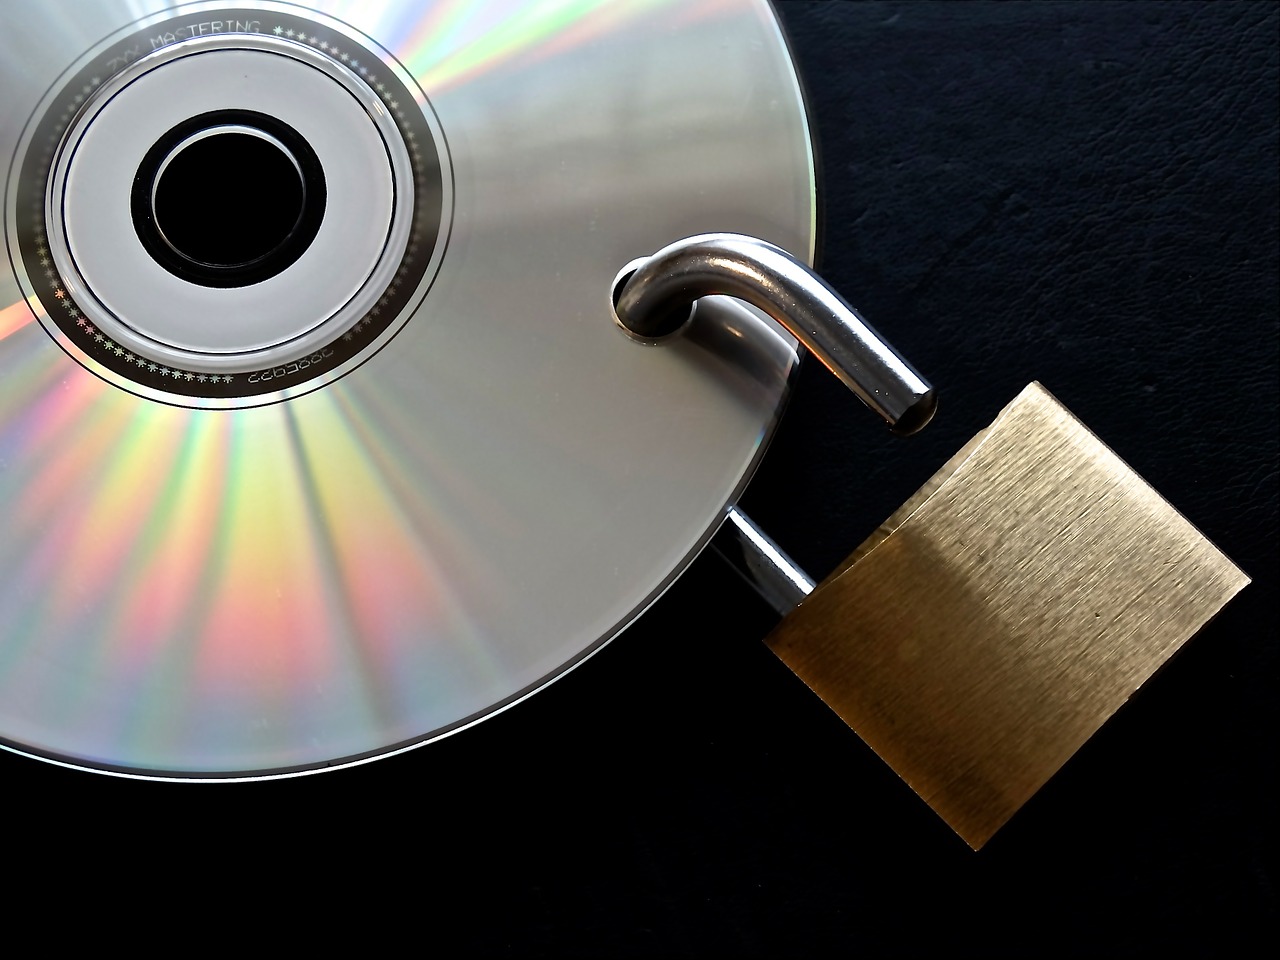 CD with a lock